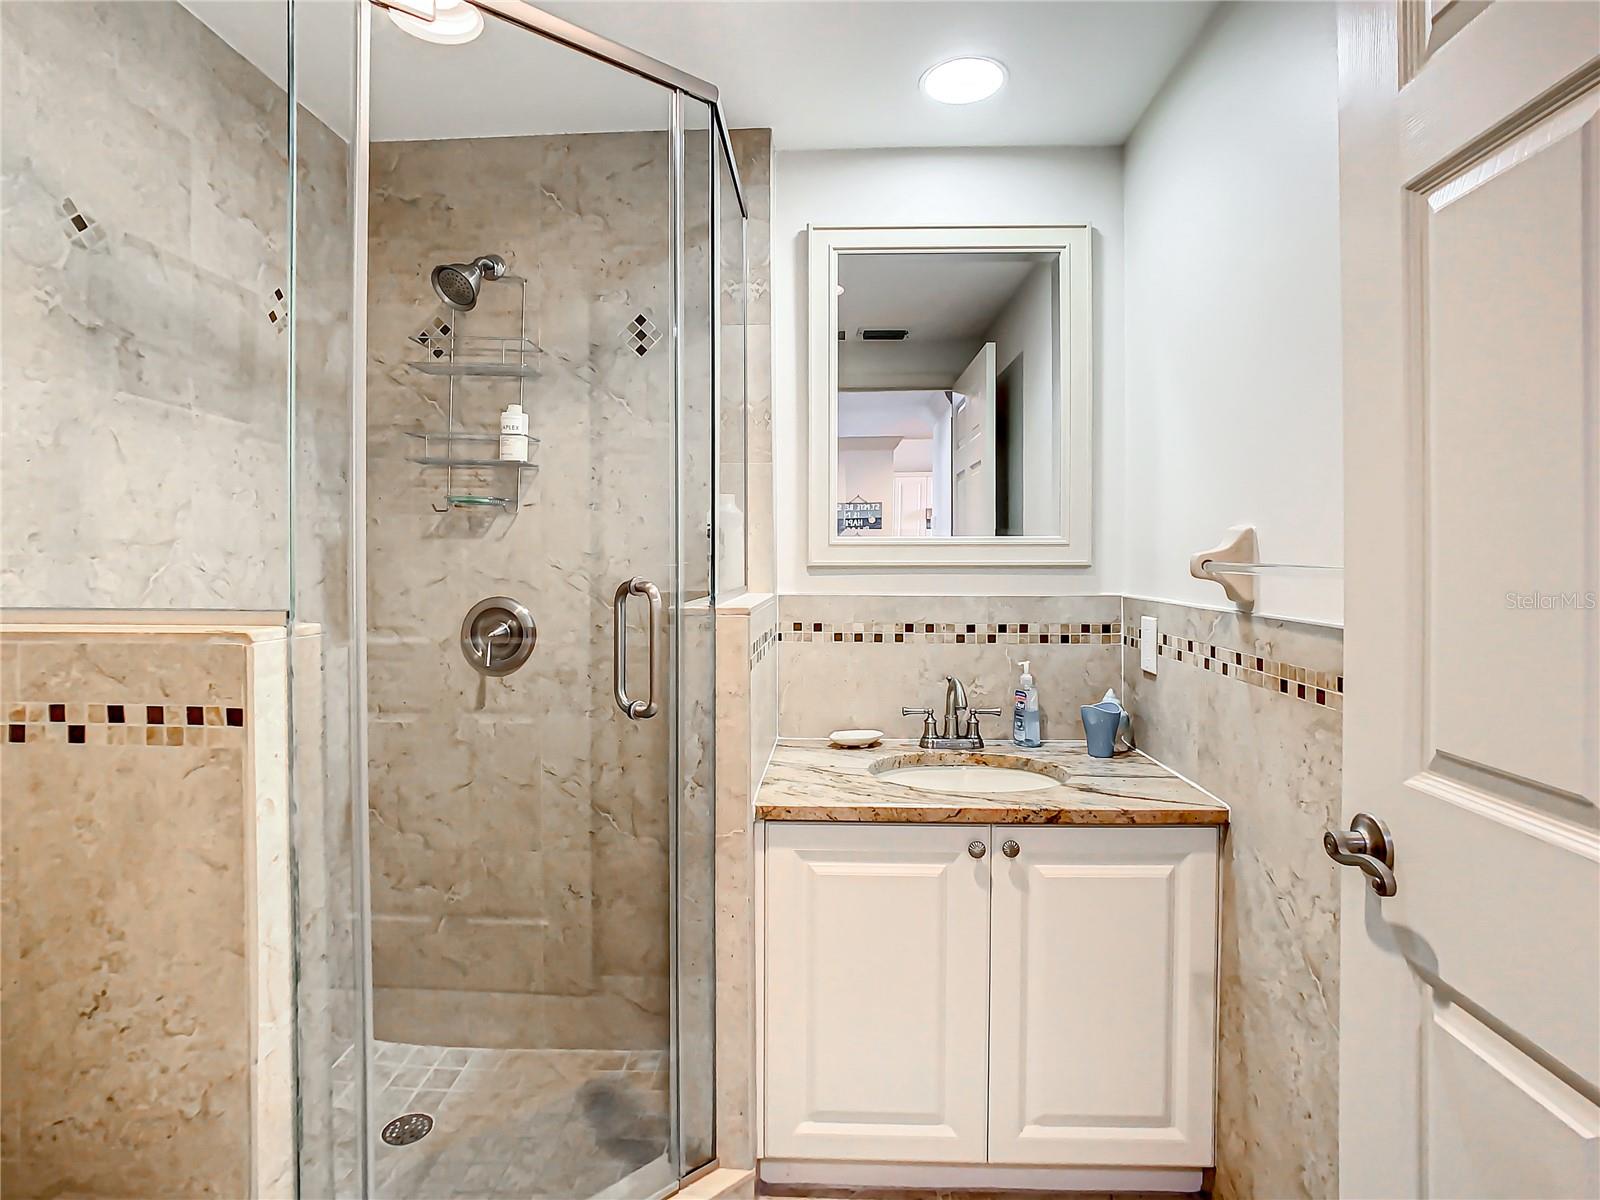 This is the guest bathroom, nicely updated with walk in shower.